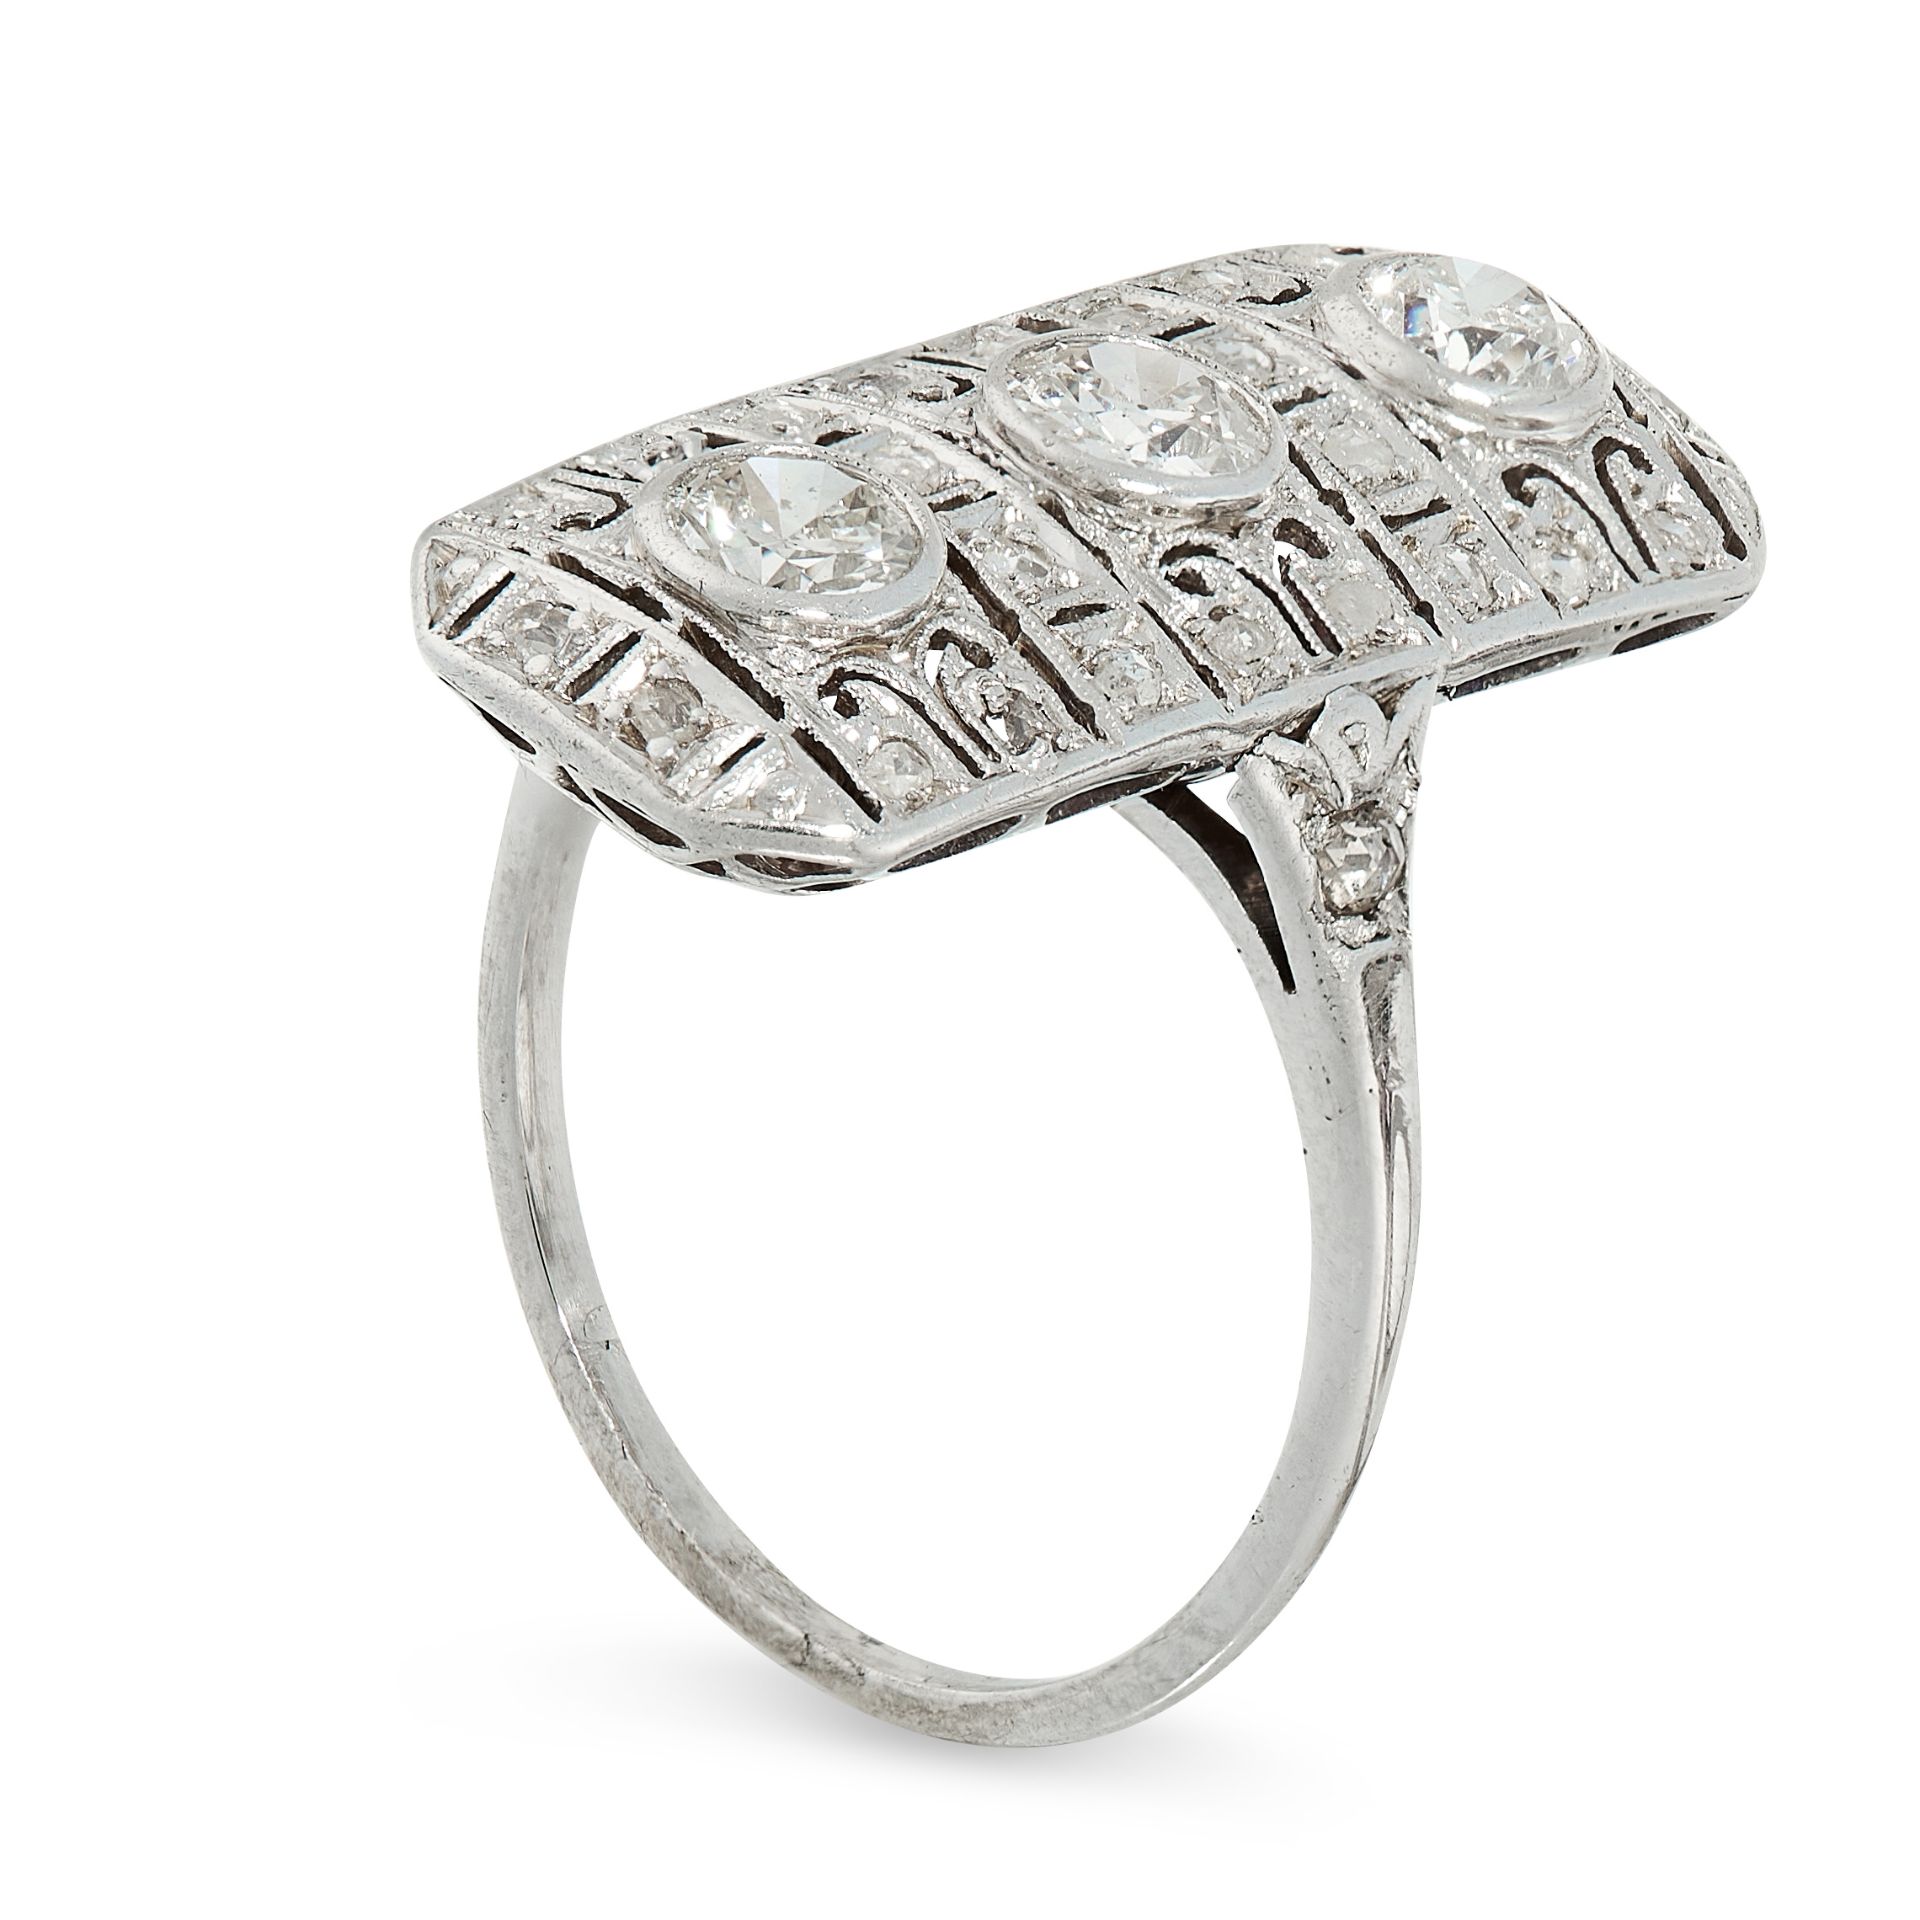 DIAMOND DRESS RING, CIRCA 1940 of plaque design, the face set with a trio of old cut diamonds, - Image 2 of 2